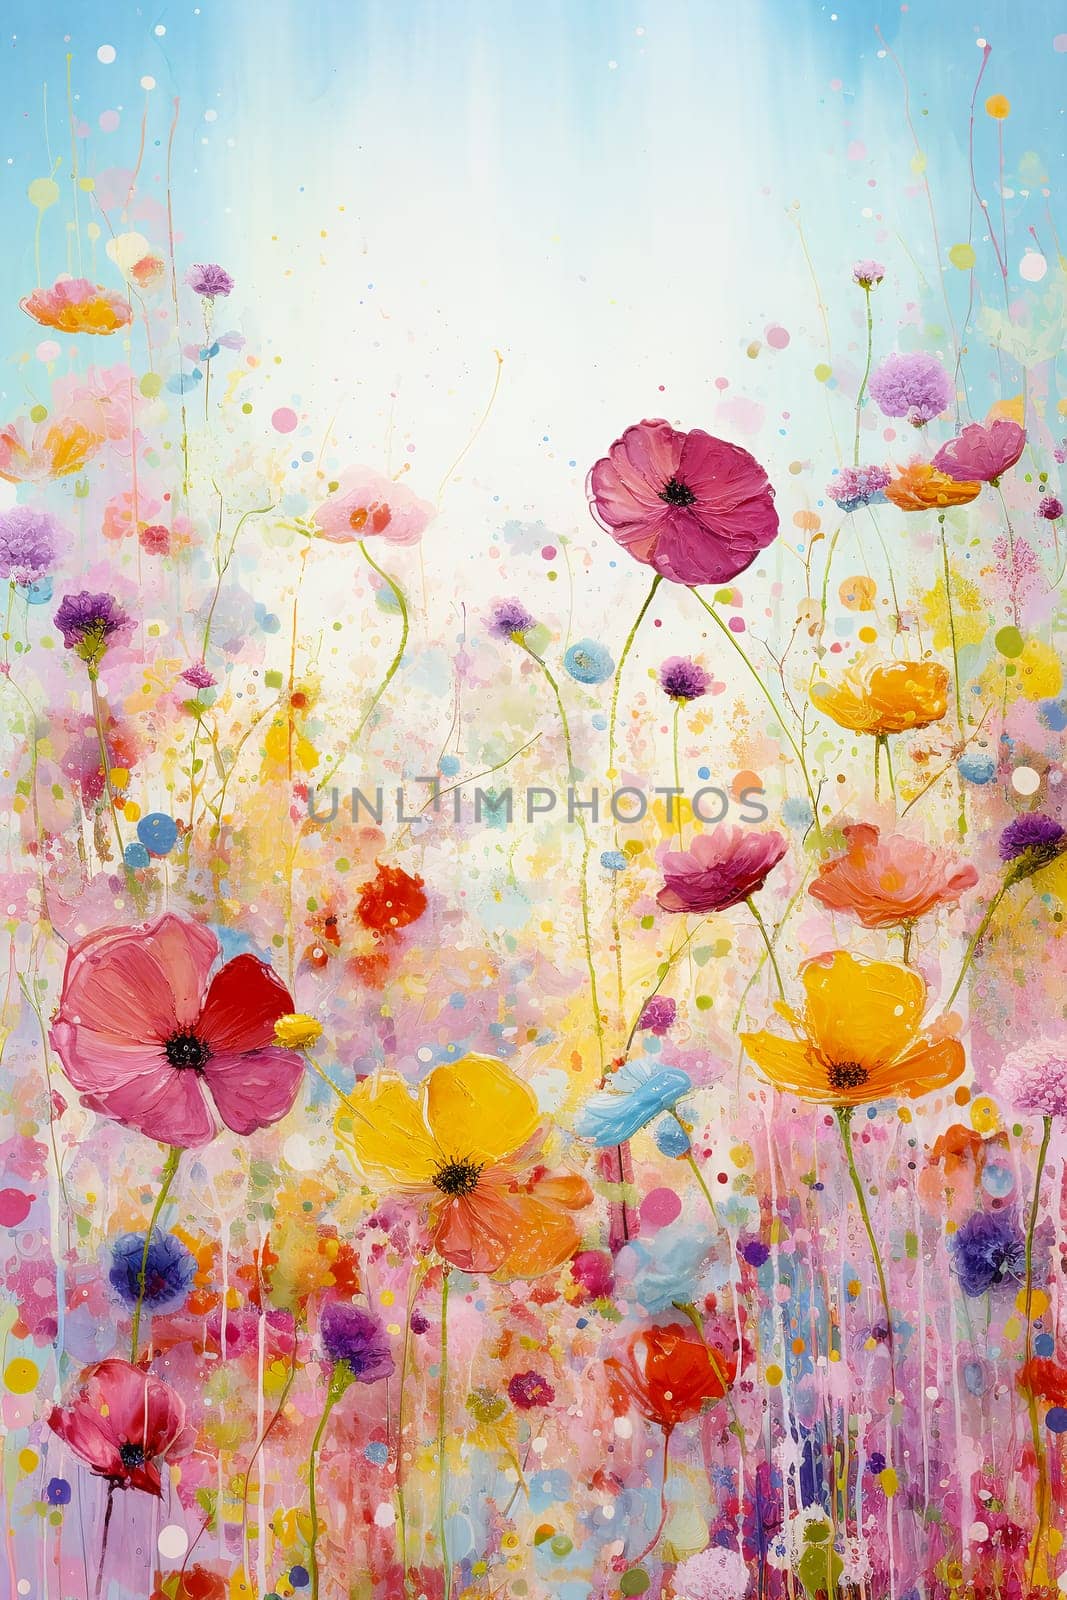 A vibrant, abstract painting featuring a field of colorful flowers, infused with a sense of springs's joyful essence by chrisroll